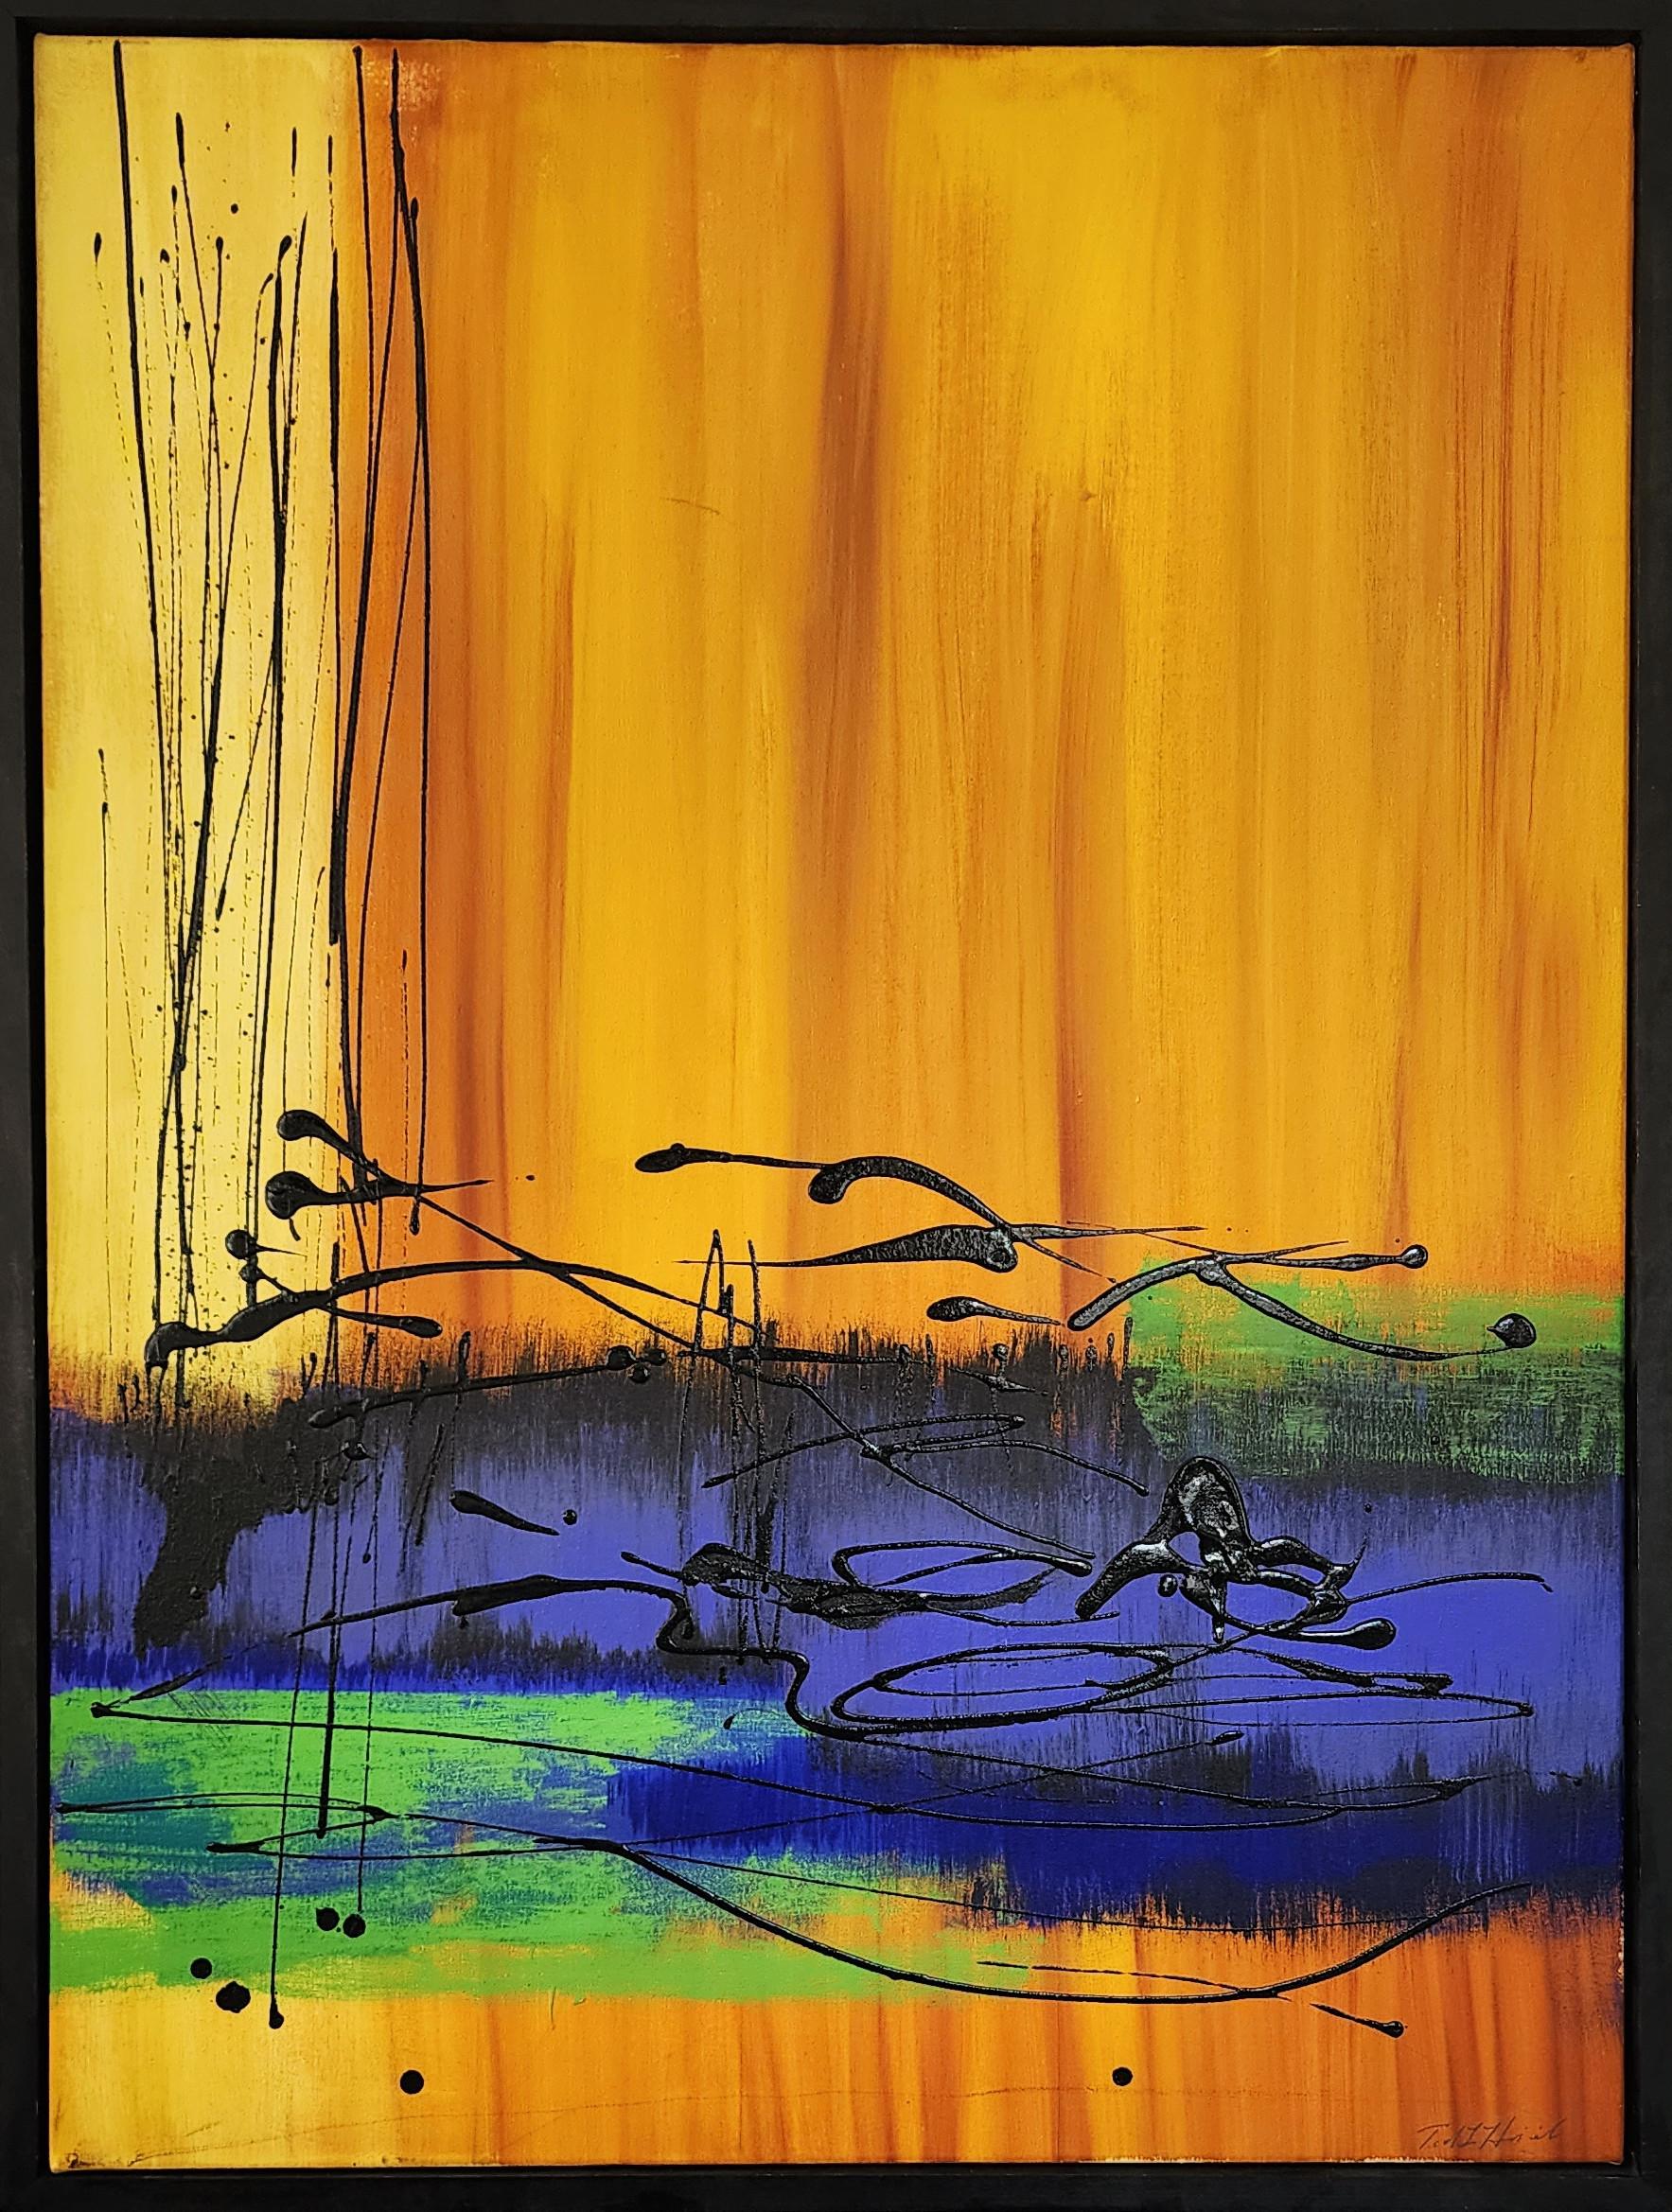 Spirit of Nature (Abstraction, Drips, Orange, Yellow, Blue, Green, Black) - Painting by Ted Hinrichs